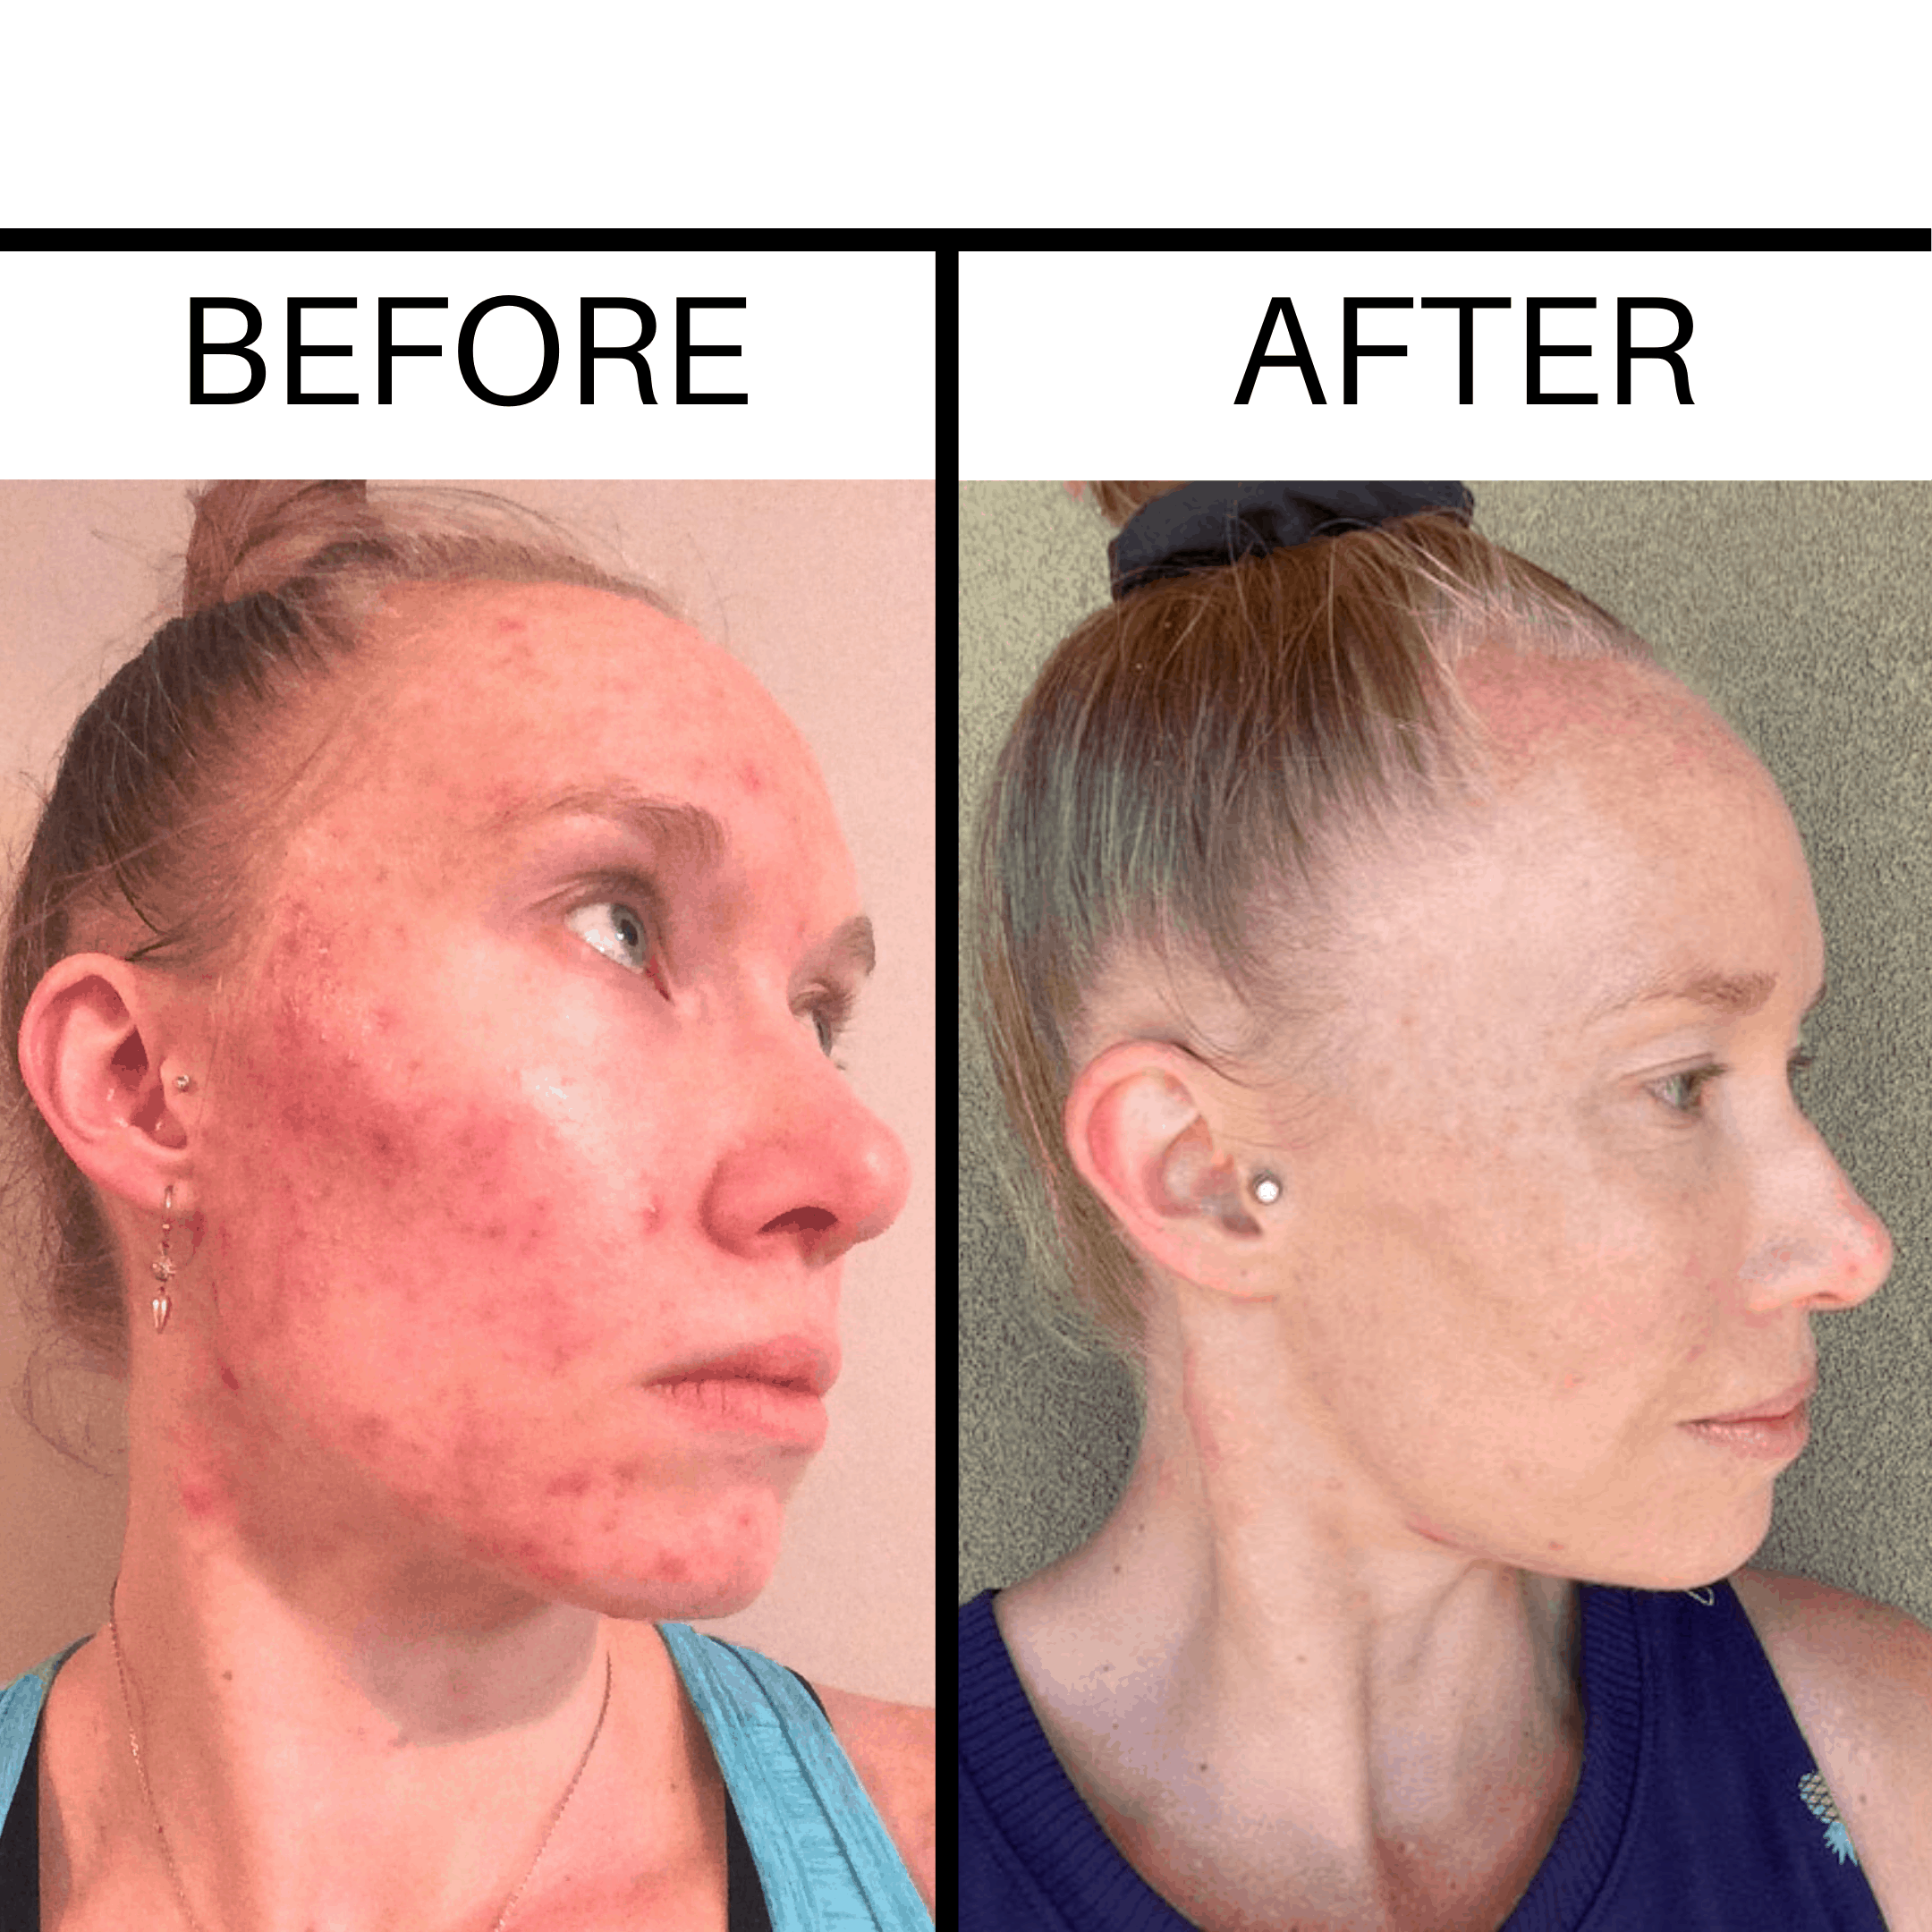 A girl with before and after photos of acne and then with clear skin after using the Beautycounter overnight resurfacing peel.